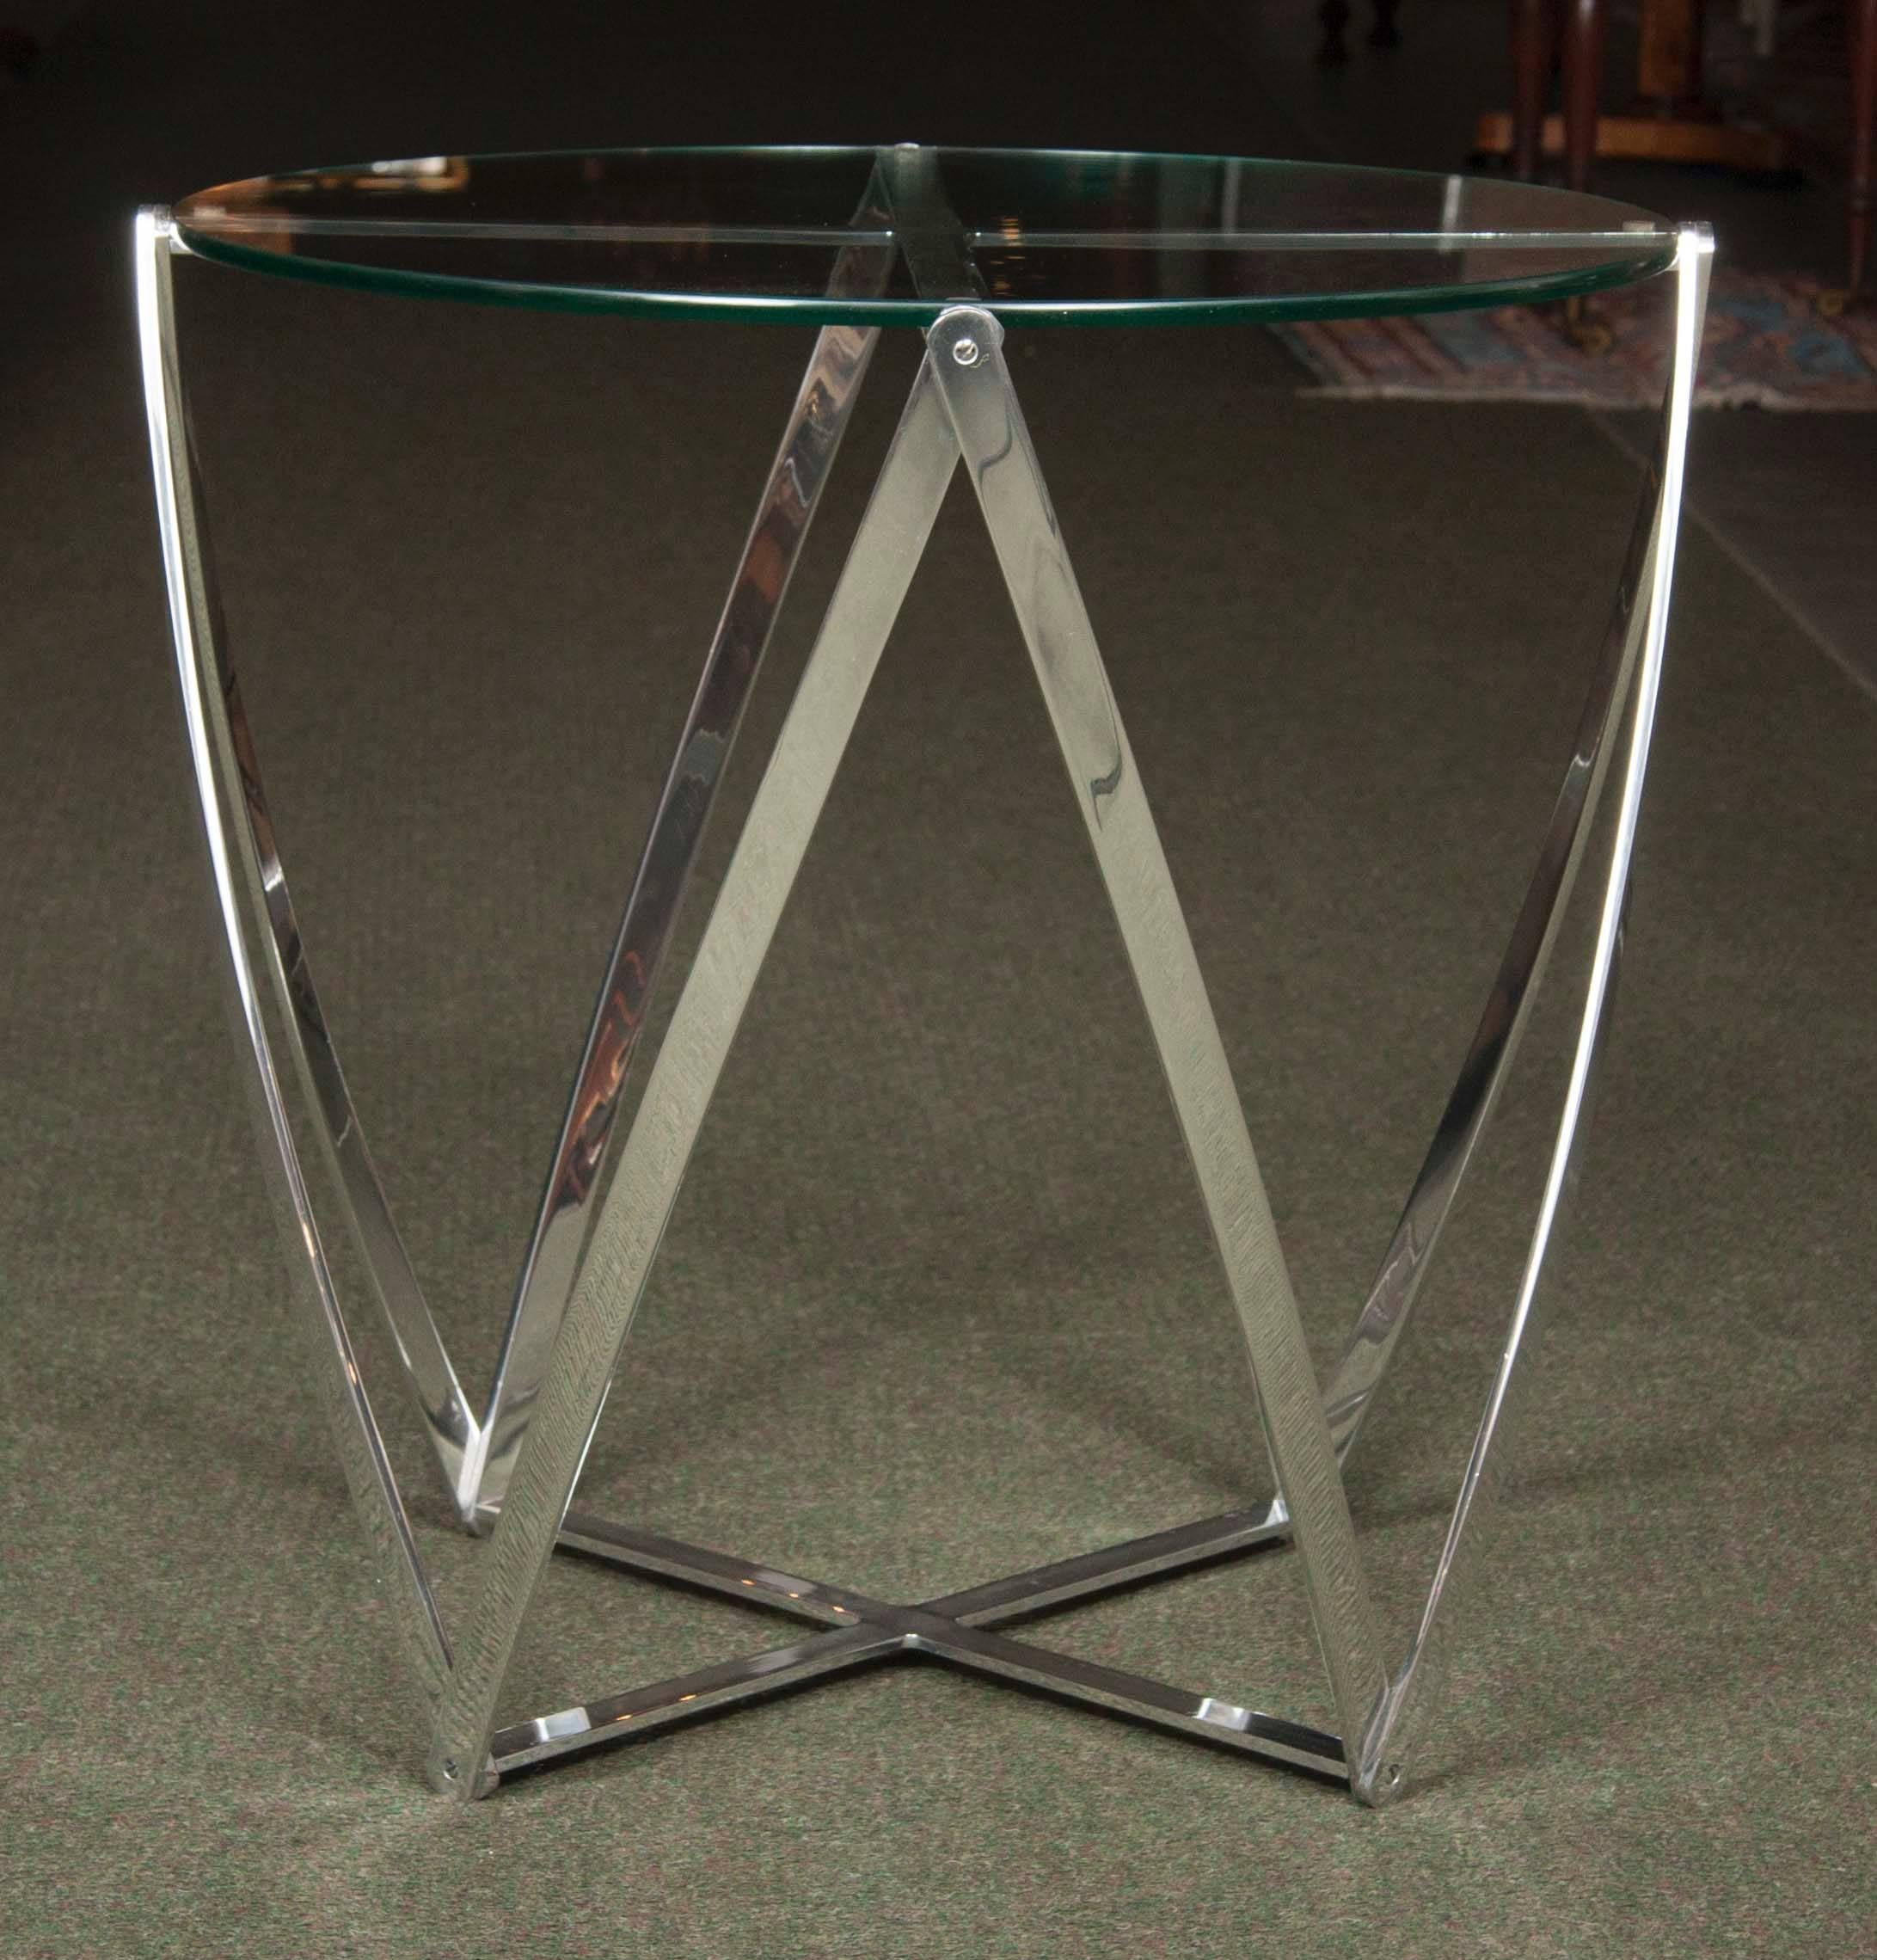 A  aluminum frame, round glass-top side table designed by John Vesey from the third quarter of the 20th century.